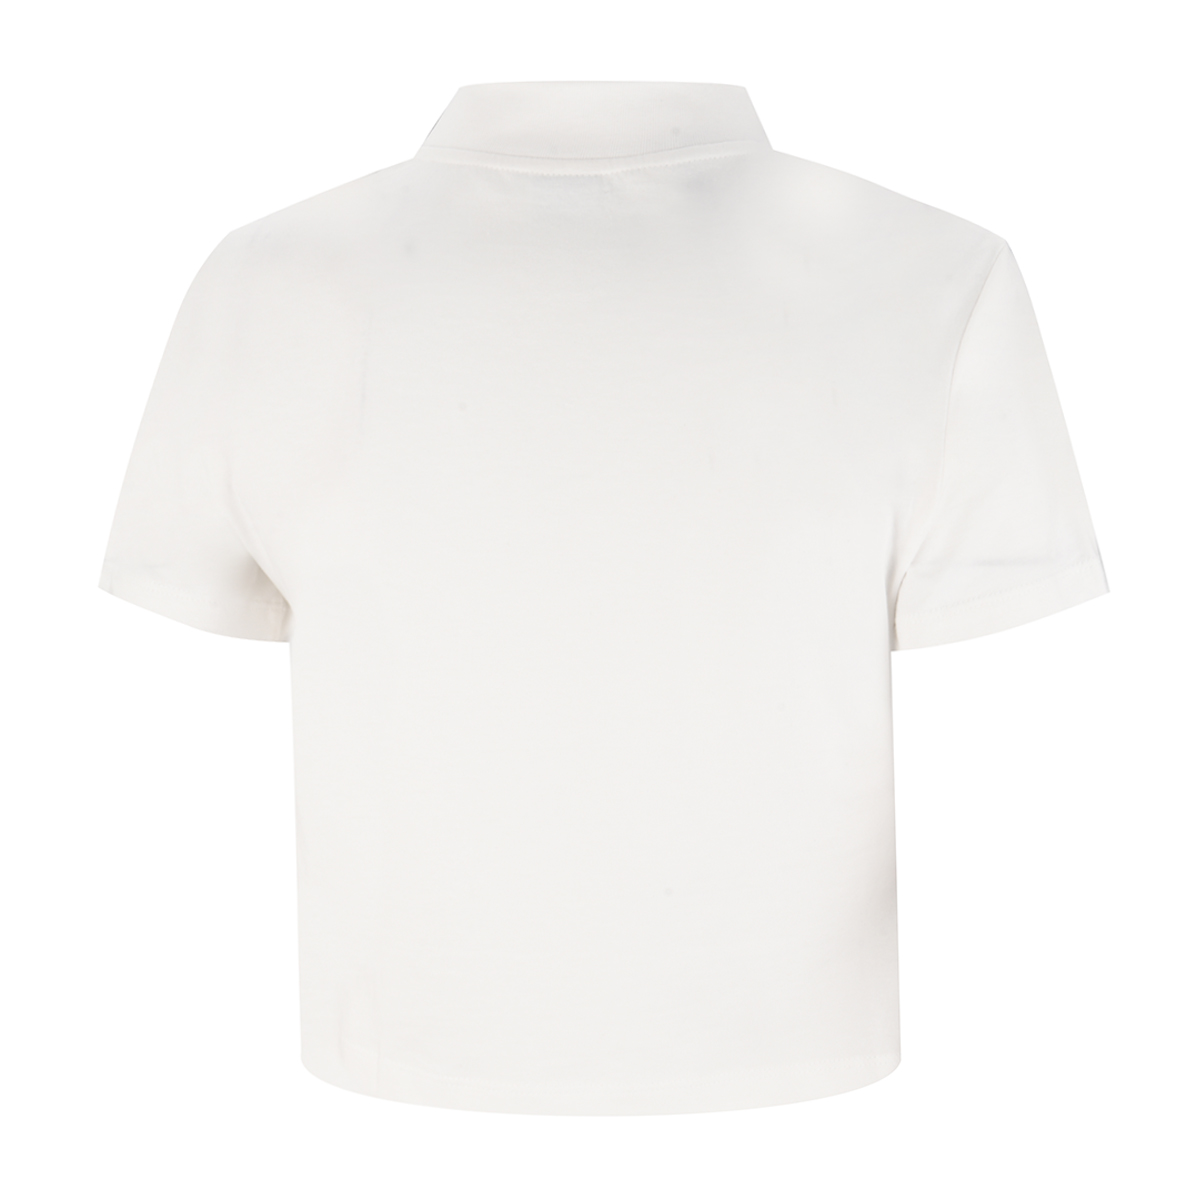 Remera Puma Classics Archive Remastered,  image number null